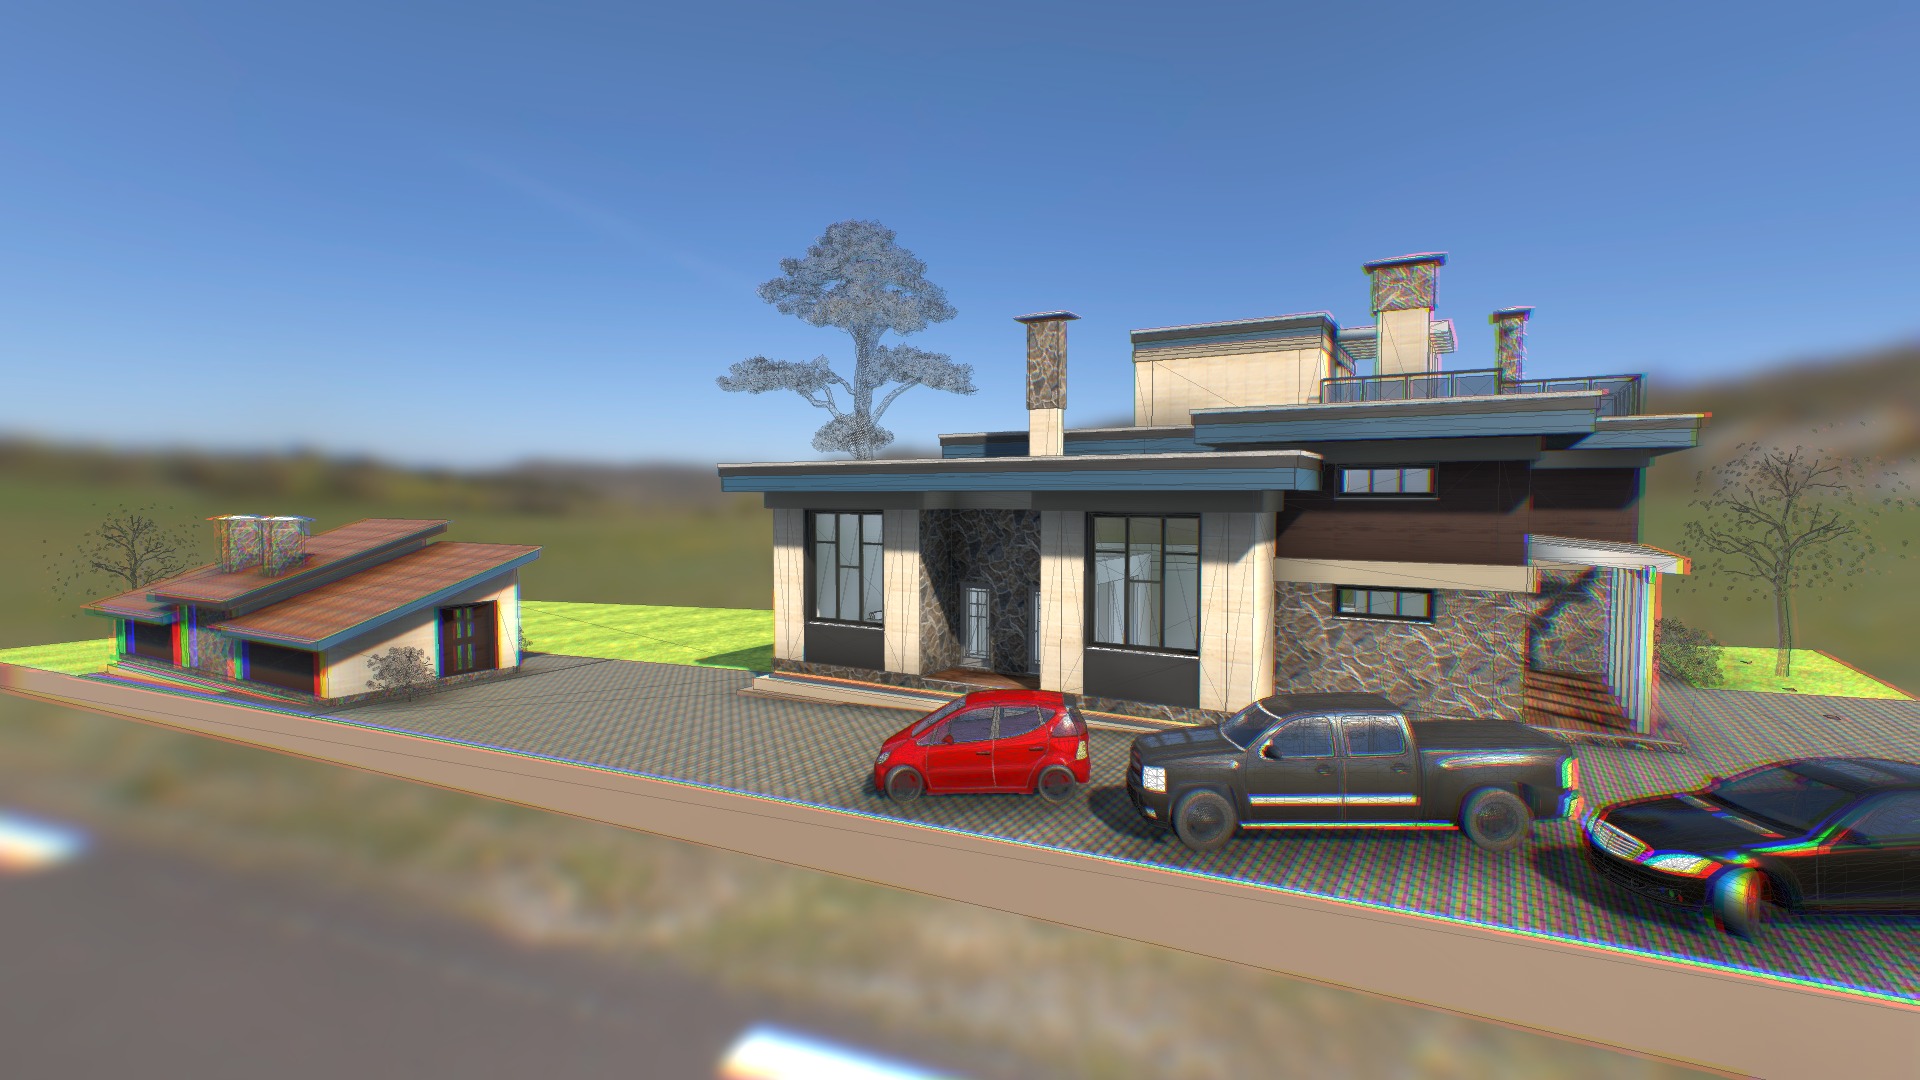 3D model Эскиз - This is a 3D model of the Эскиз. The 3D model is about a video game of a house and cars parked in front of it.